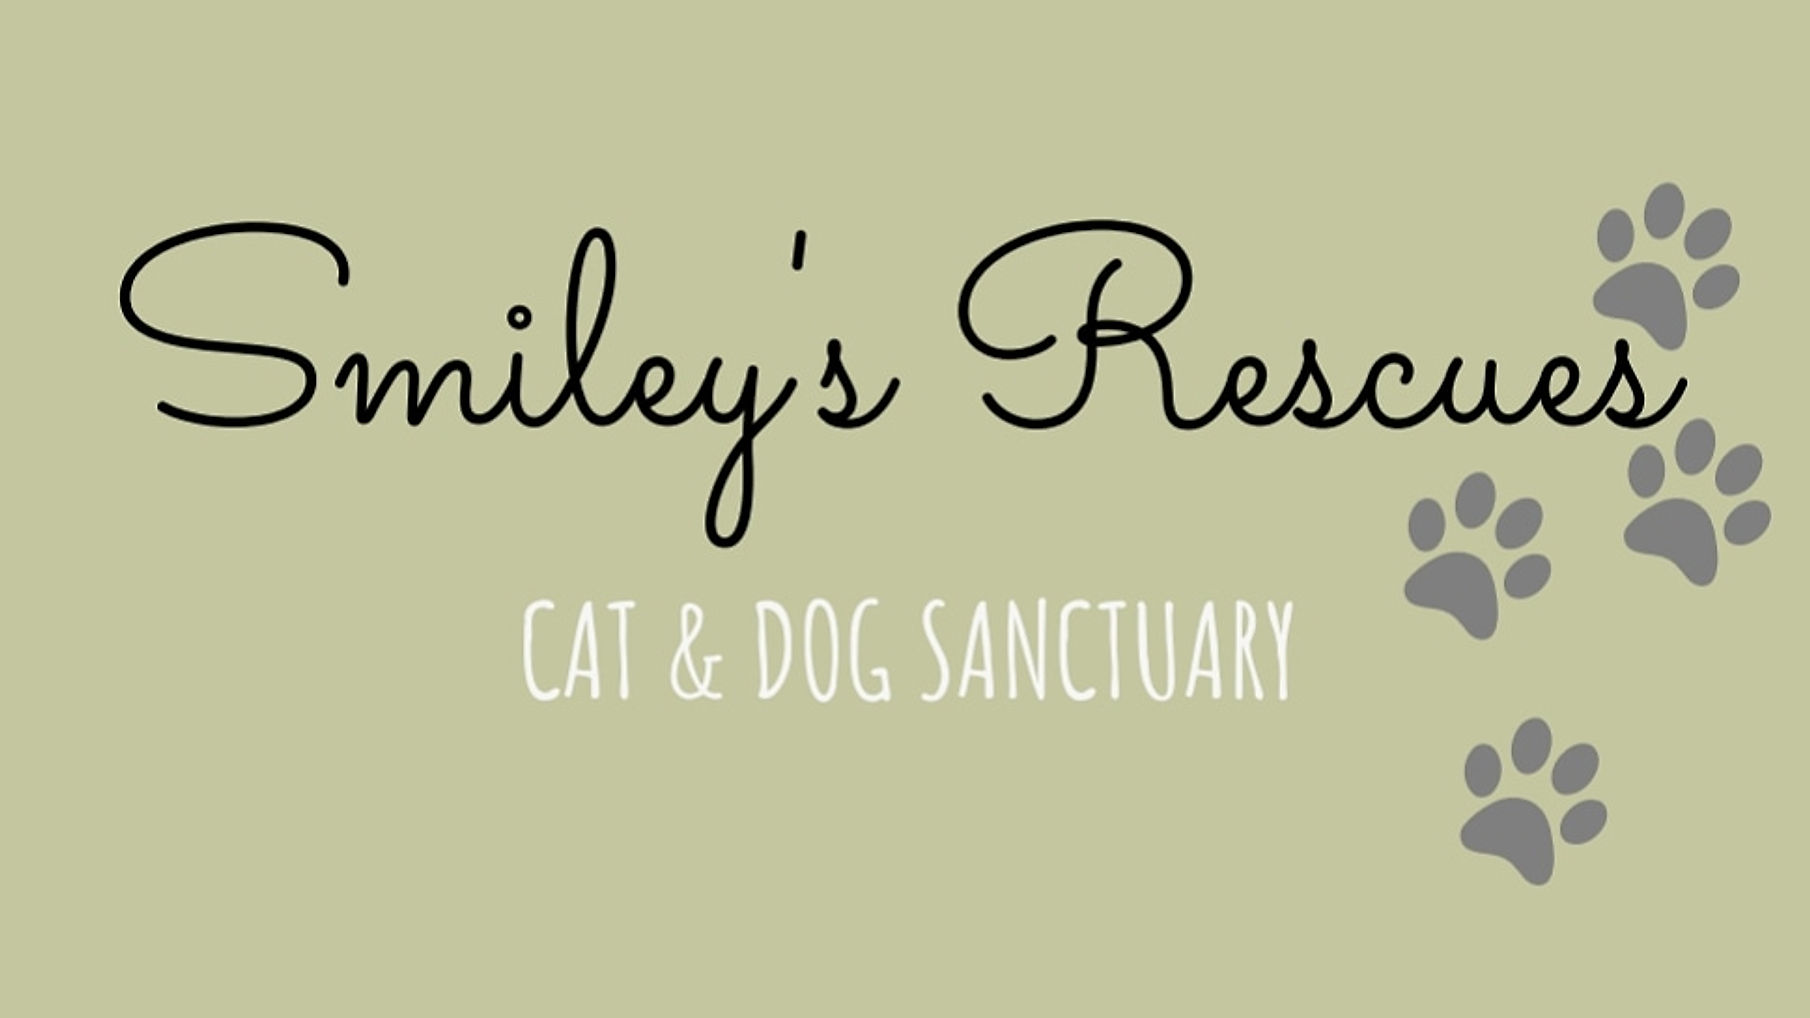 Smiley's Story's and Happenings